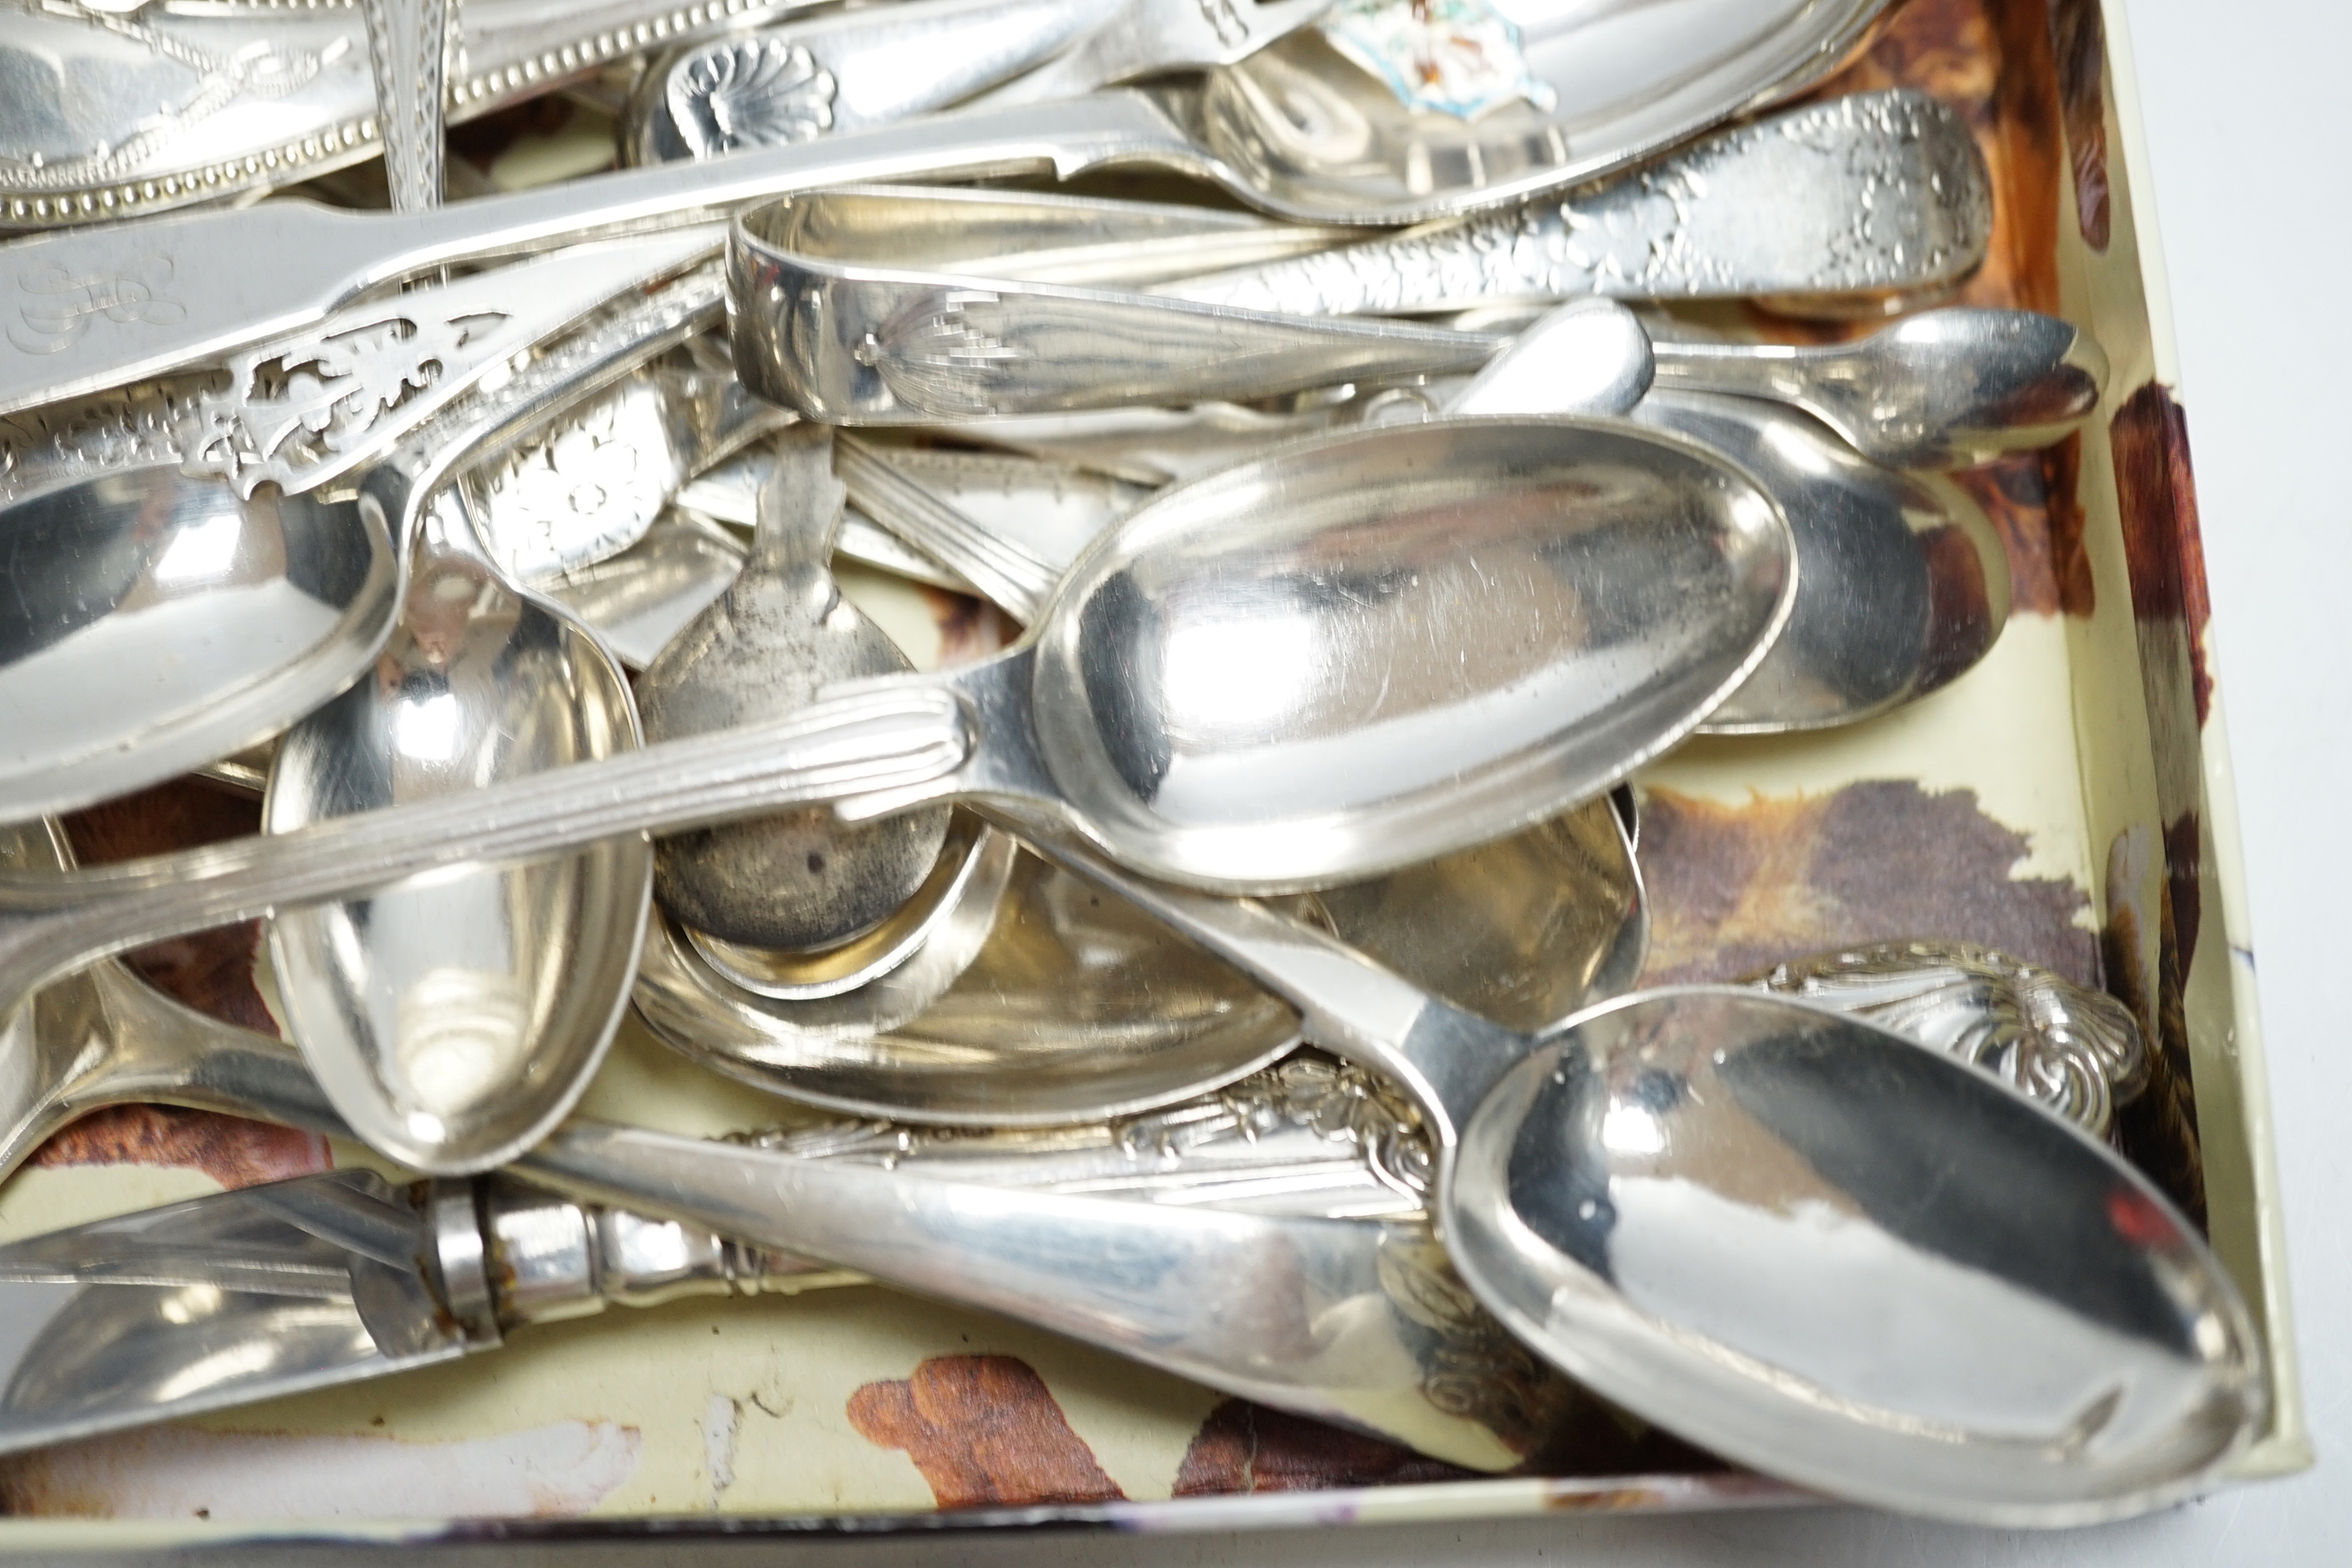 Sundry silver cutlery, including a butter knife, teaspoons, condiment spoons, sauce ladles, etc.